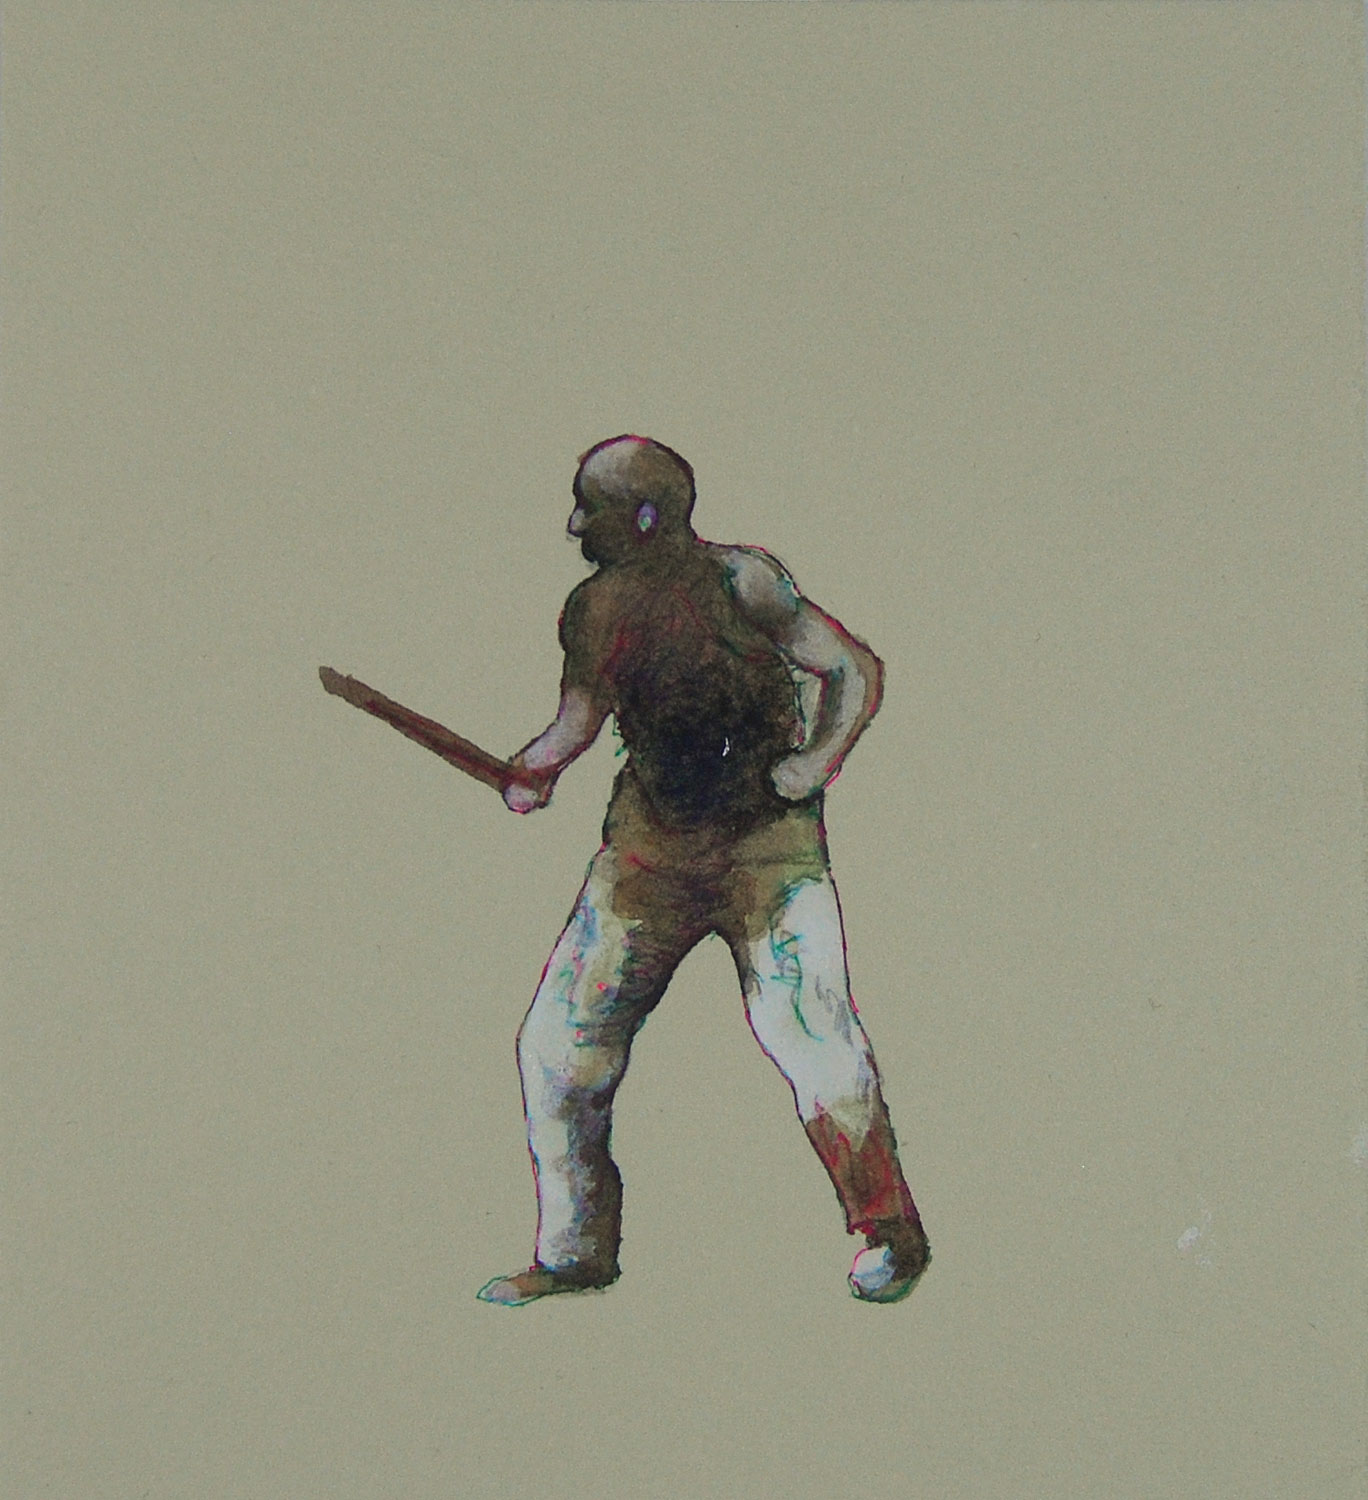 Zina Mussmann, Cain, 2012. Mixed media on paper, 5 x 4.5 in.